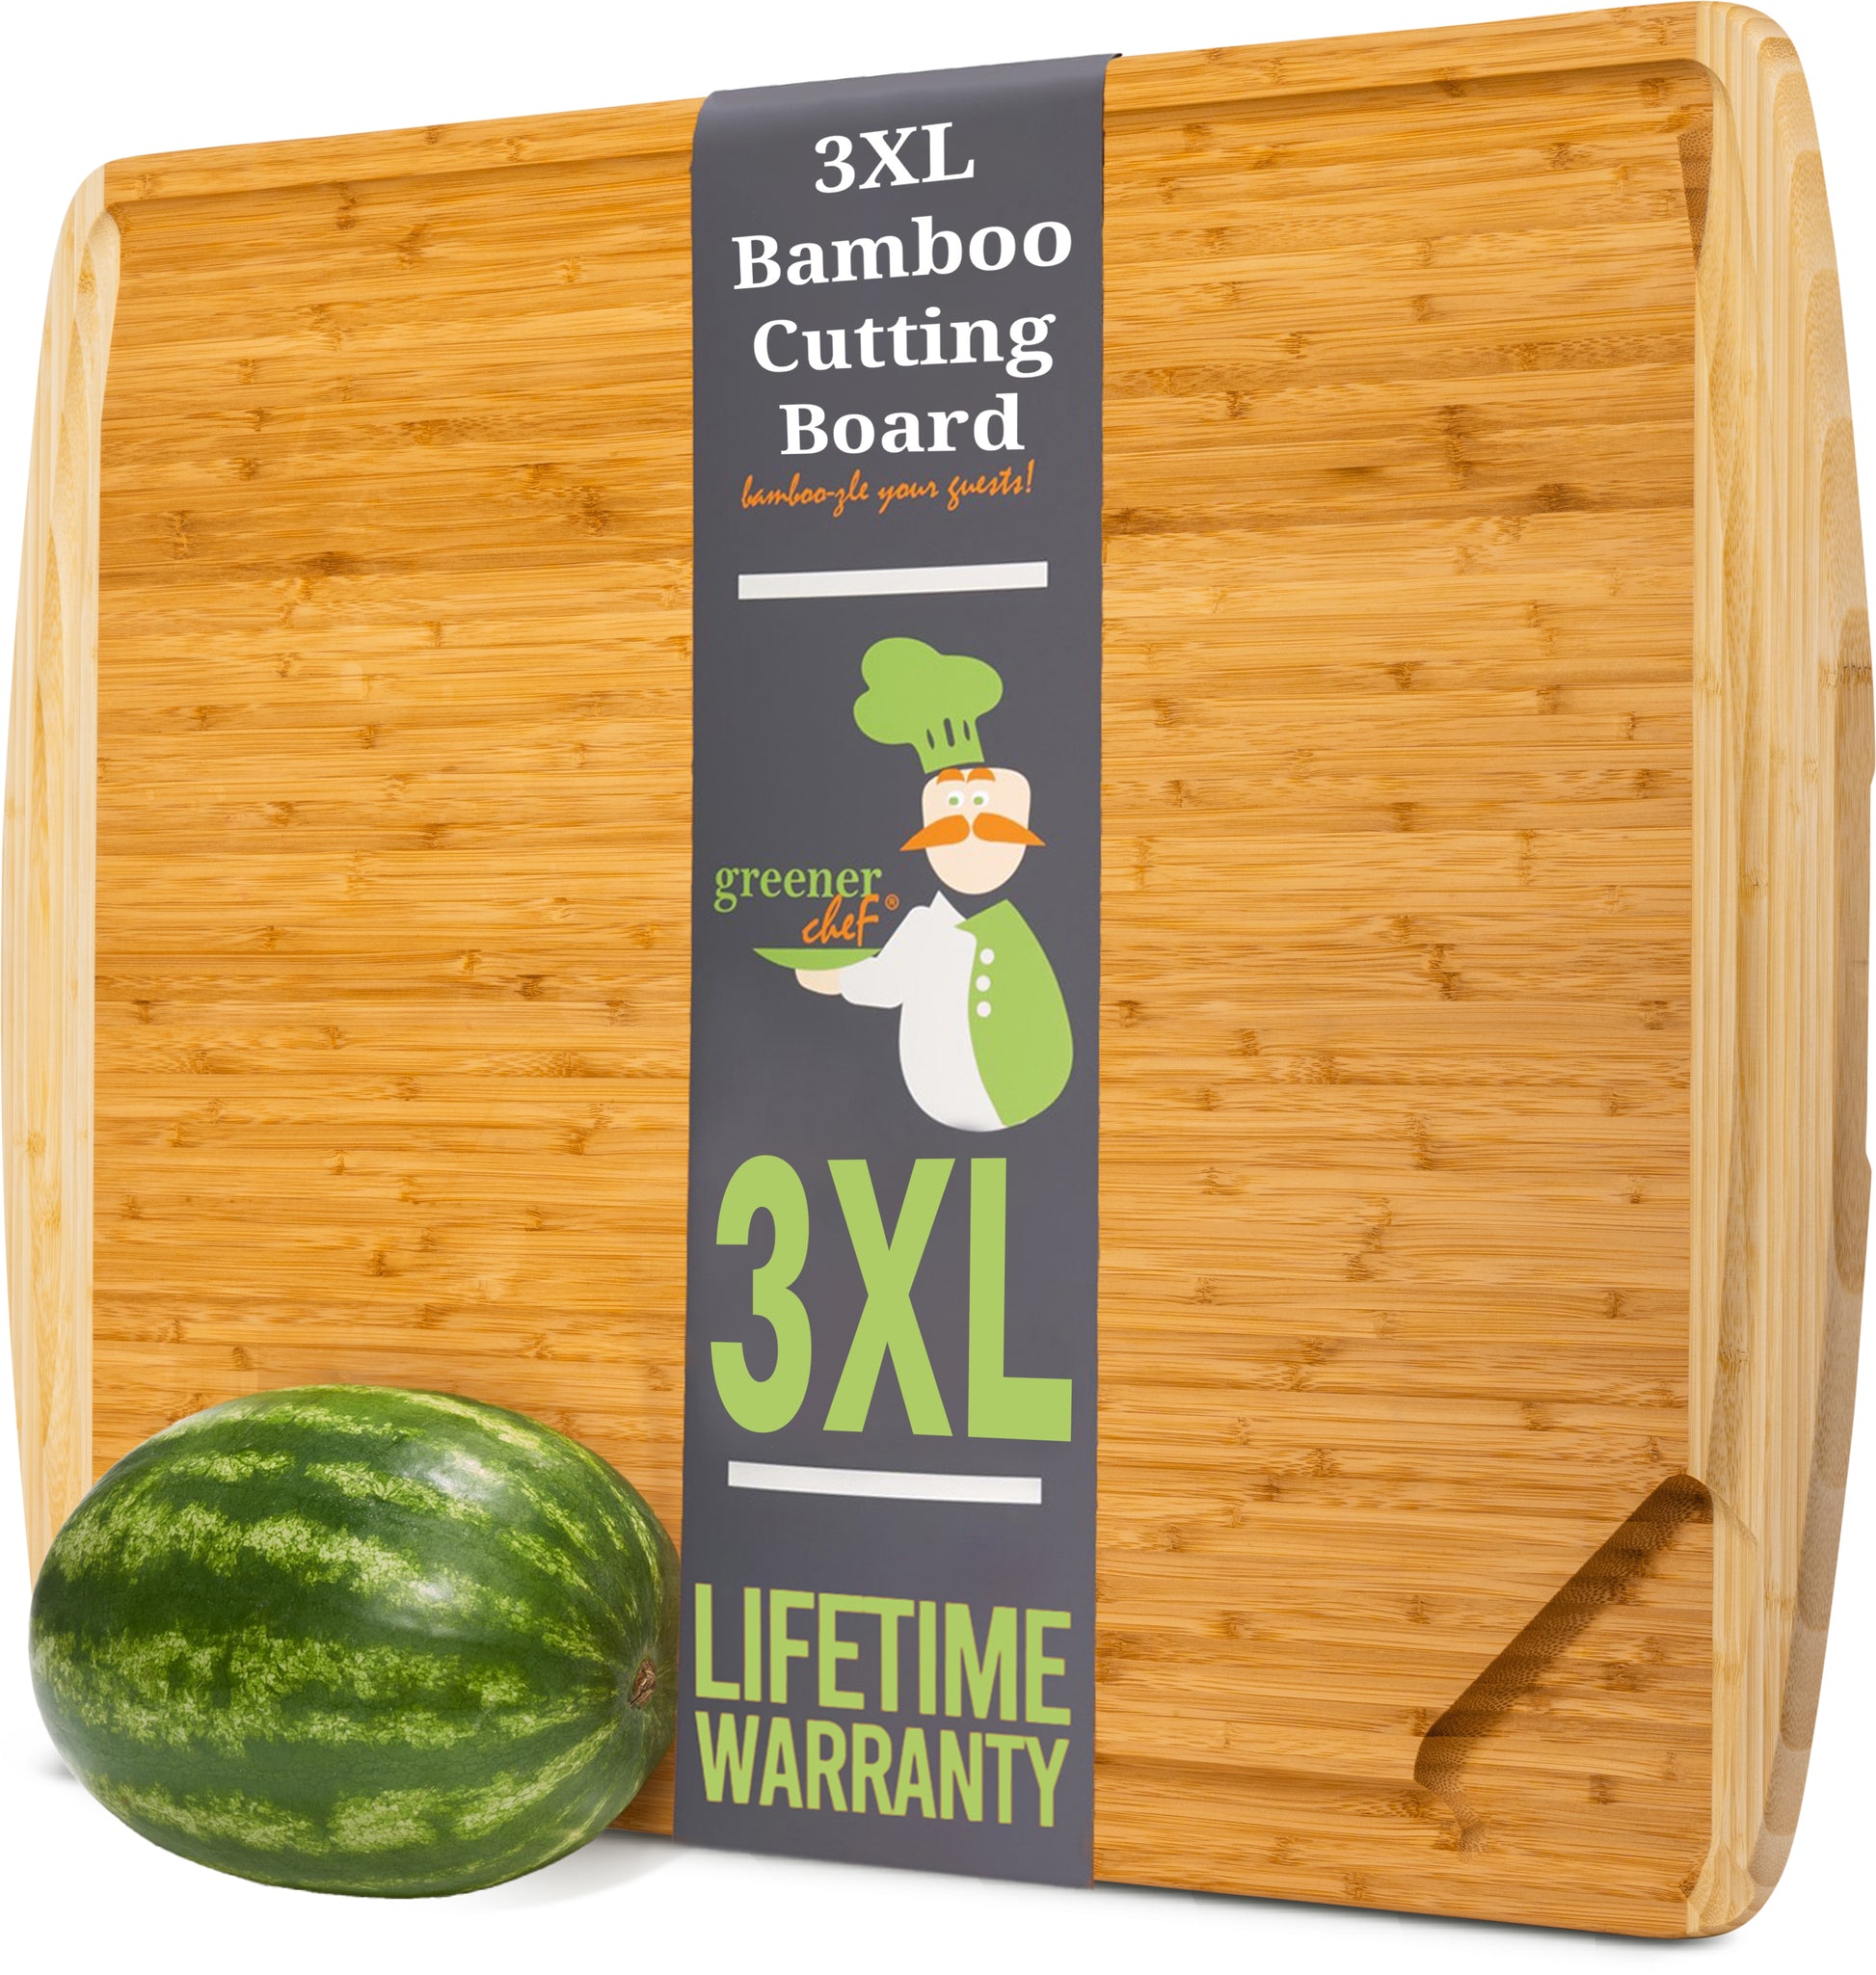 30 x 20 Extra Large Cutting Board, Bamboo Wood Cutting Board for Kitchen